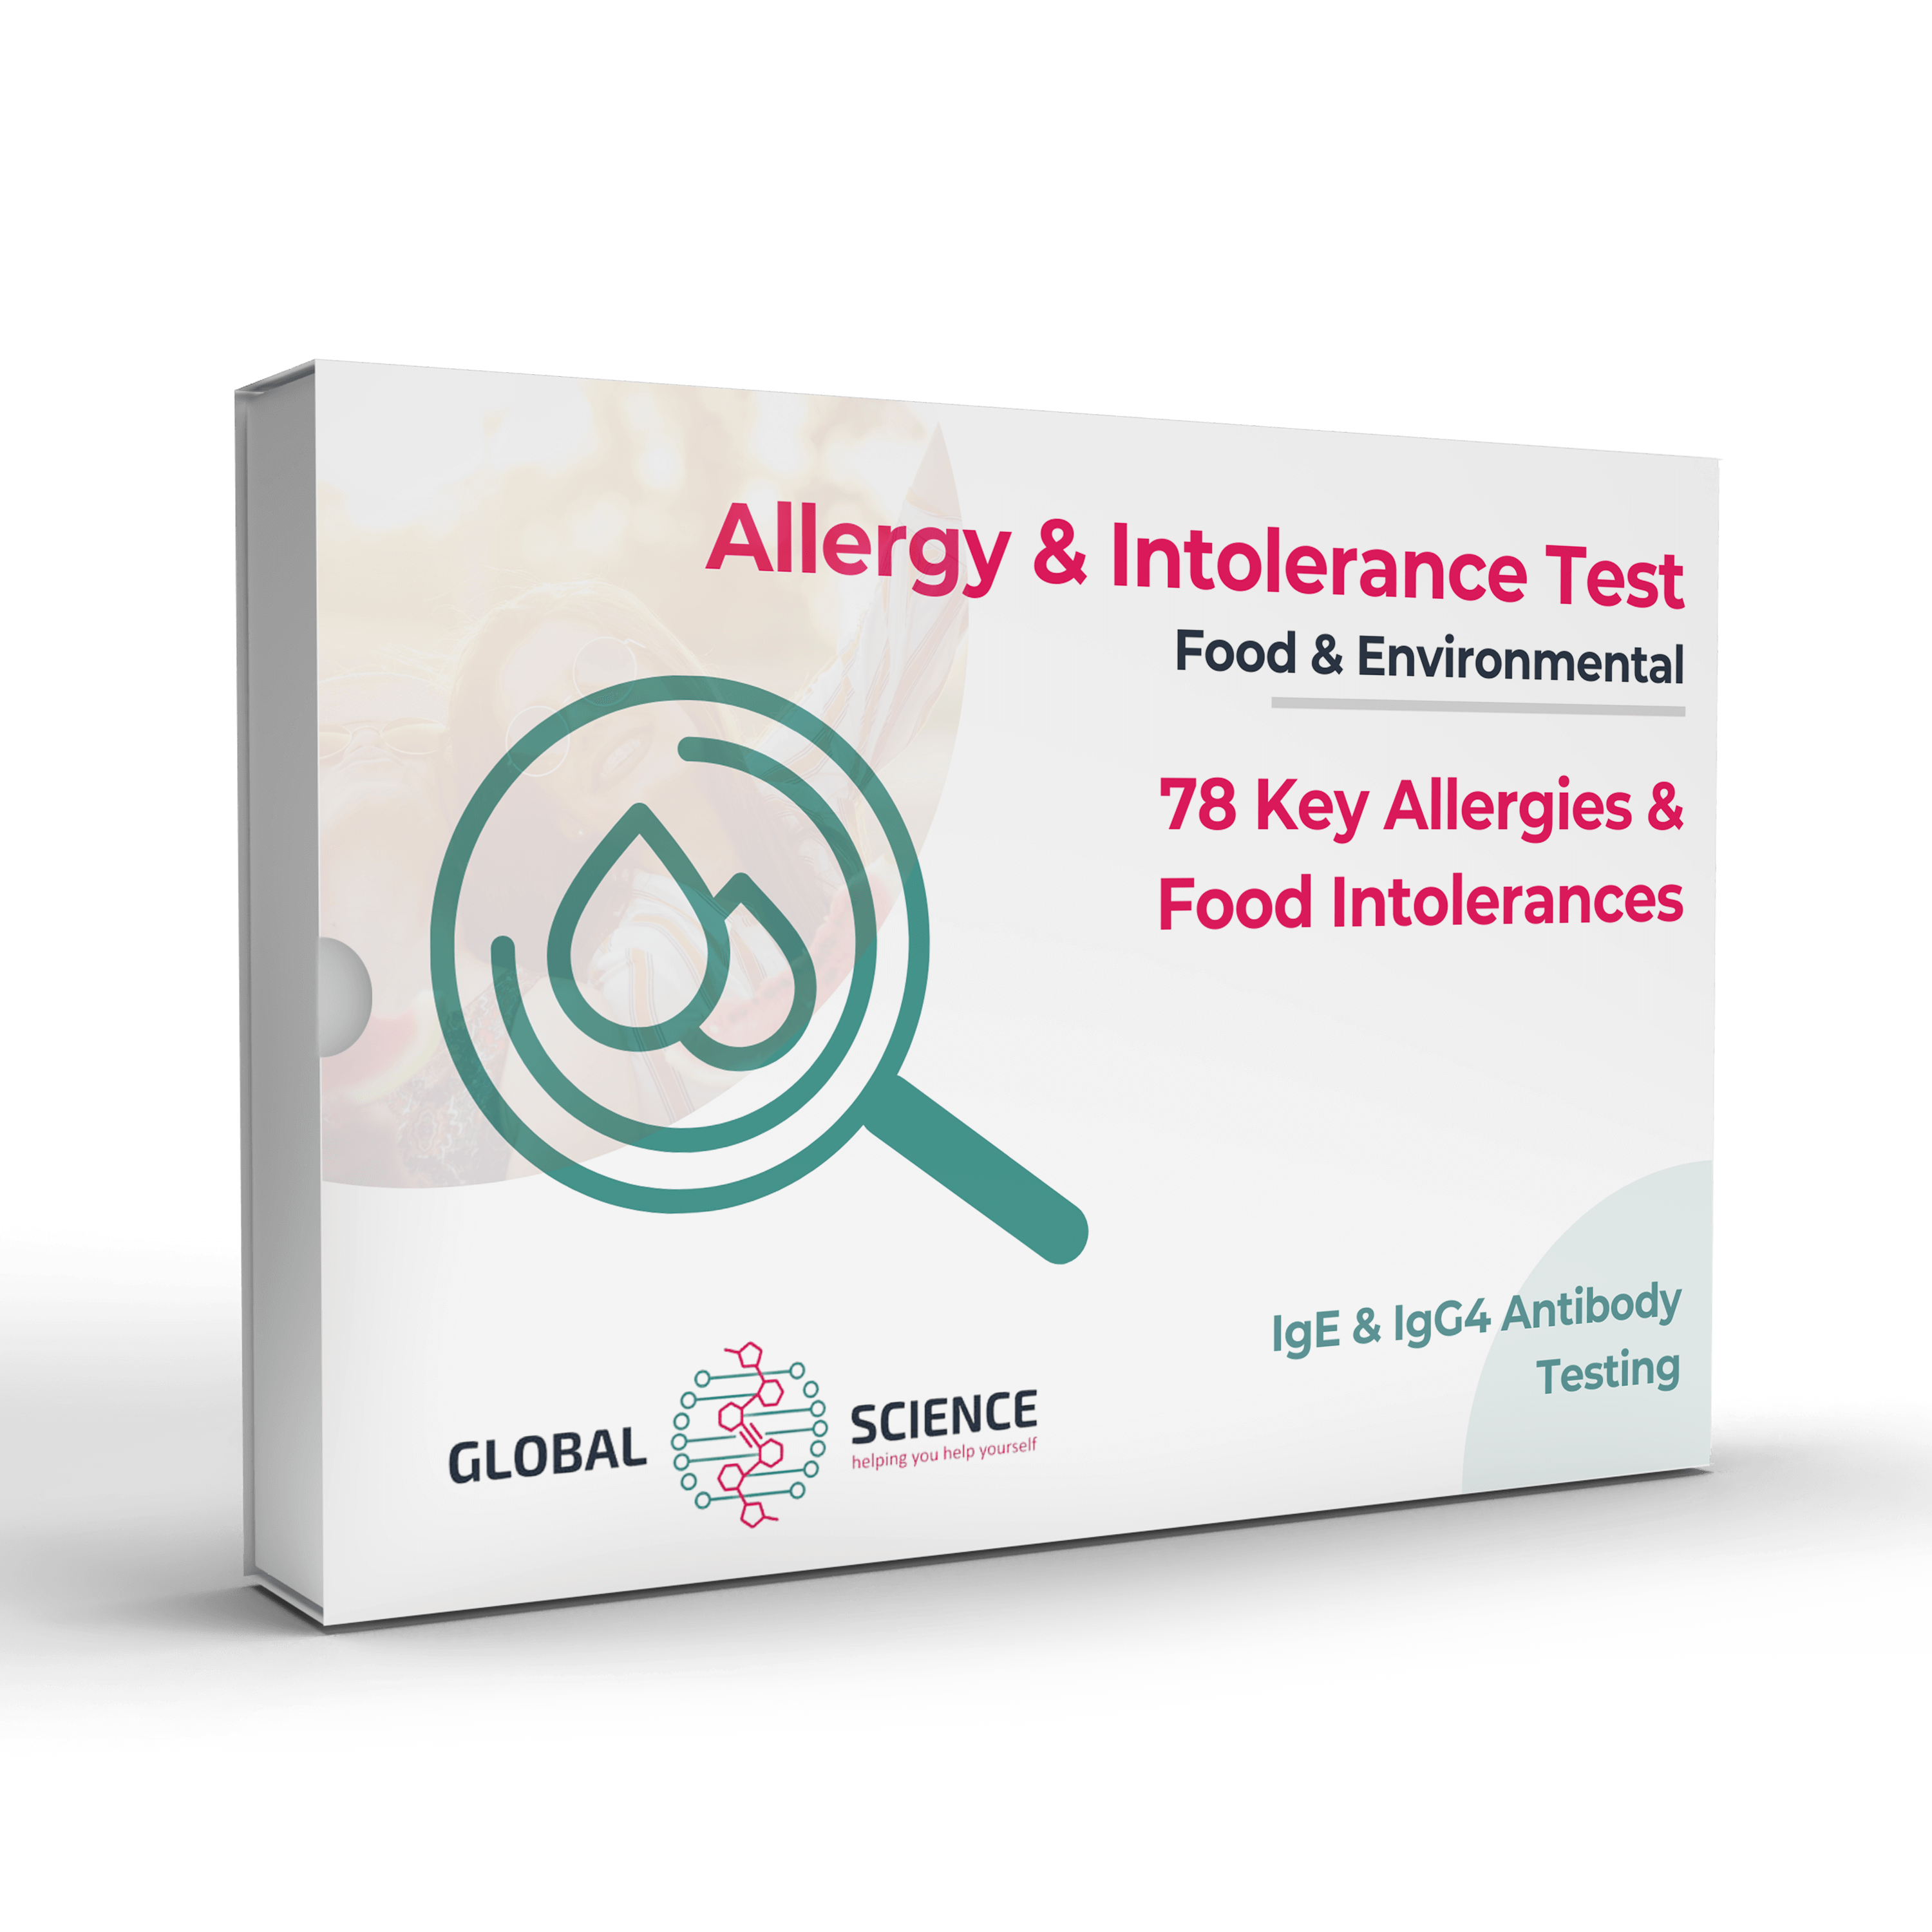 TMI TMA Allergy and Intolerance Test - Our tests